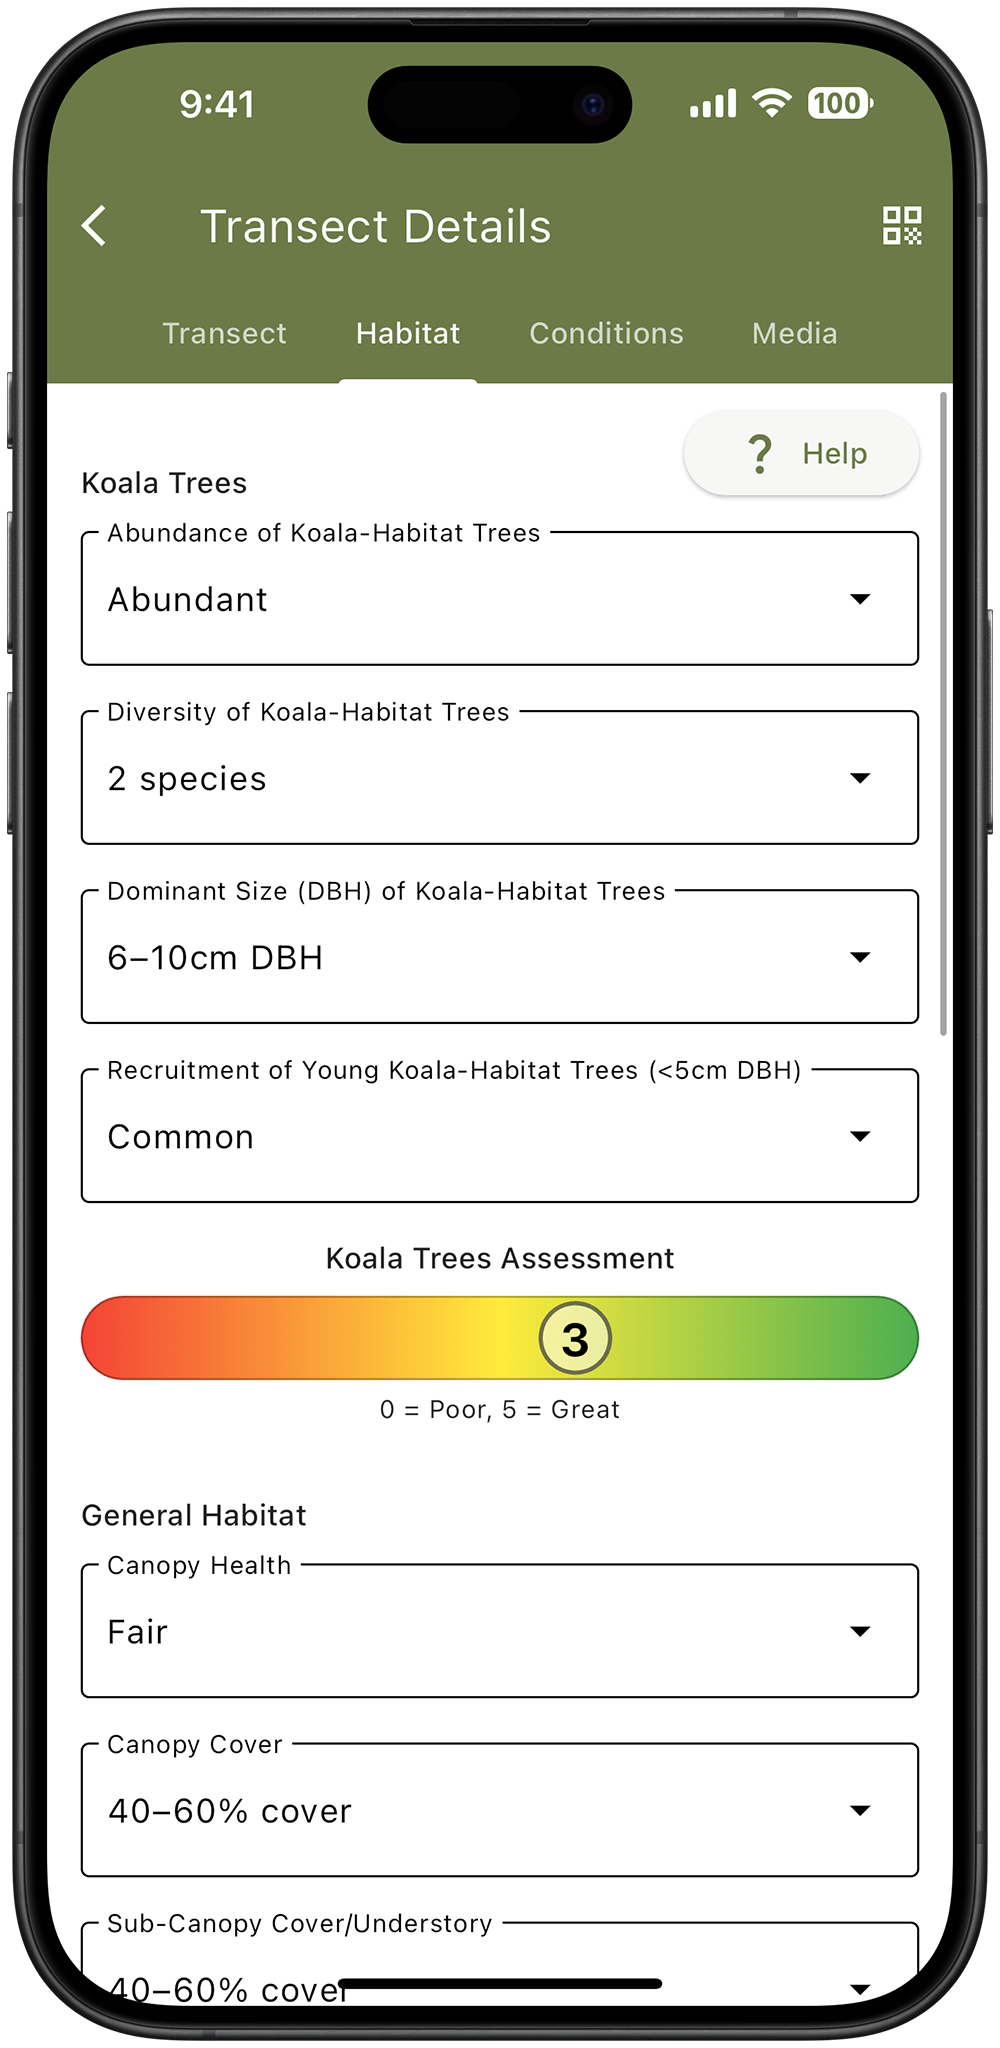 A screen shot of an app showing transect details for a sighted koala